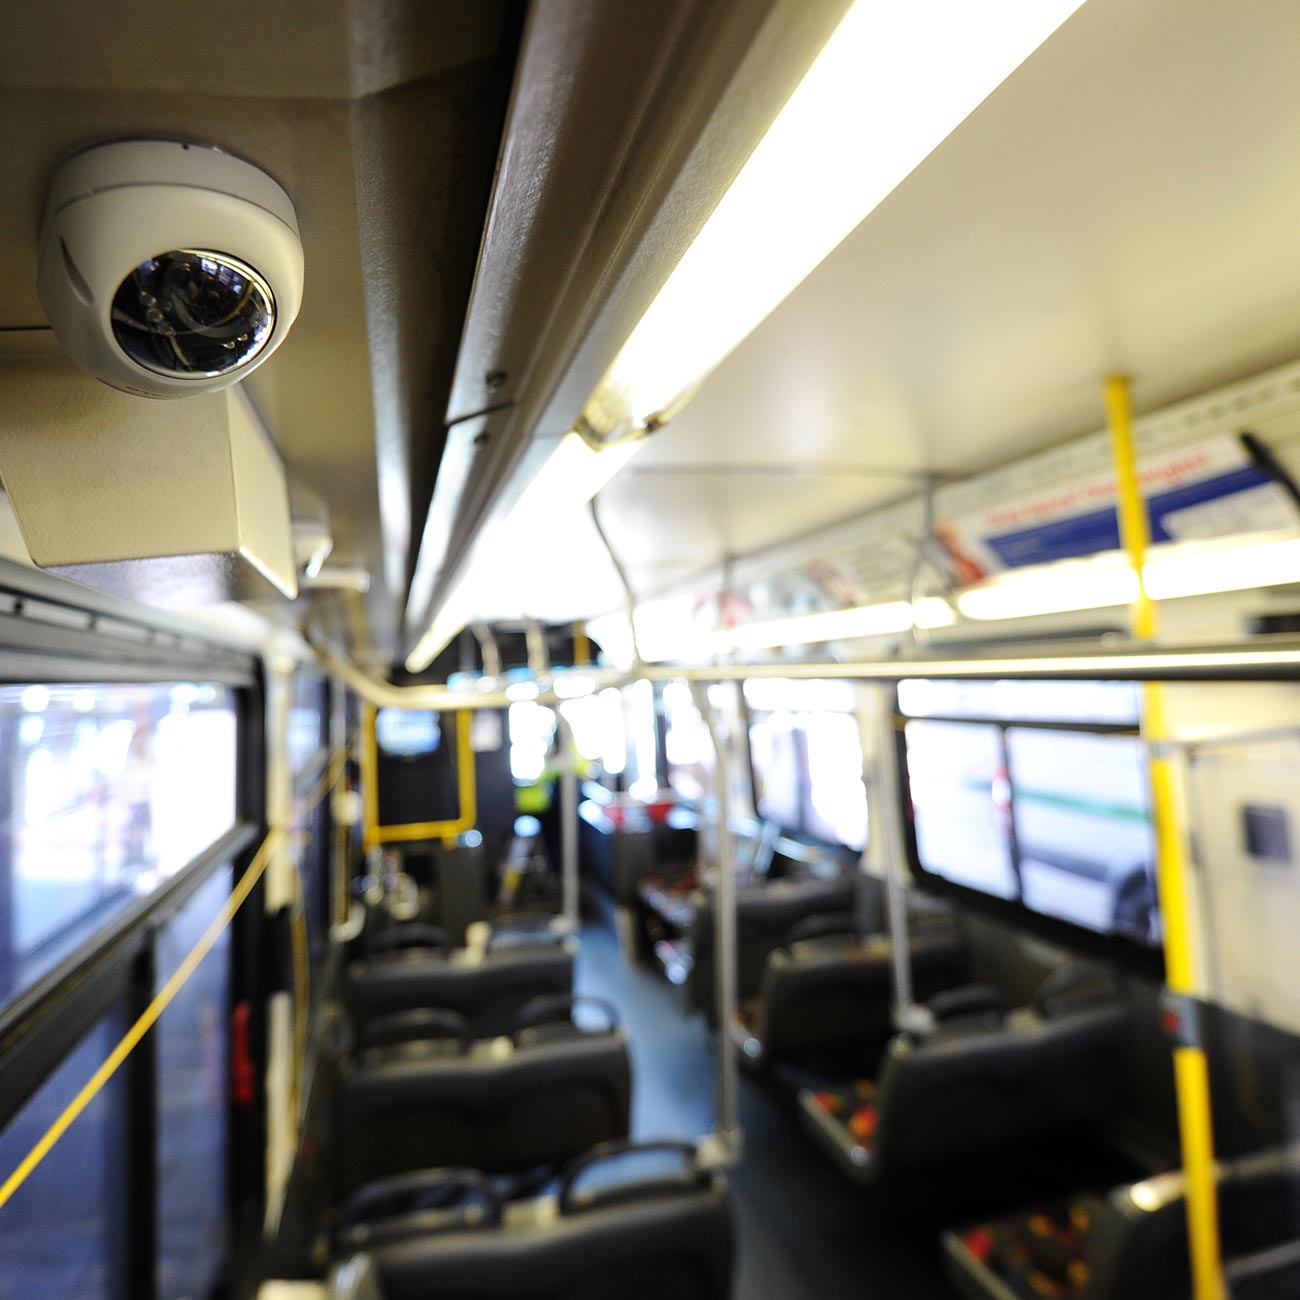 Banned Surveillance Cameras: How to Keep your Transit Operation Safe